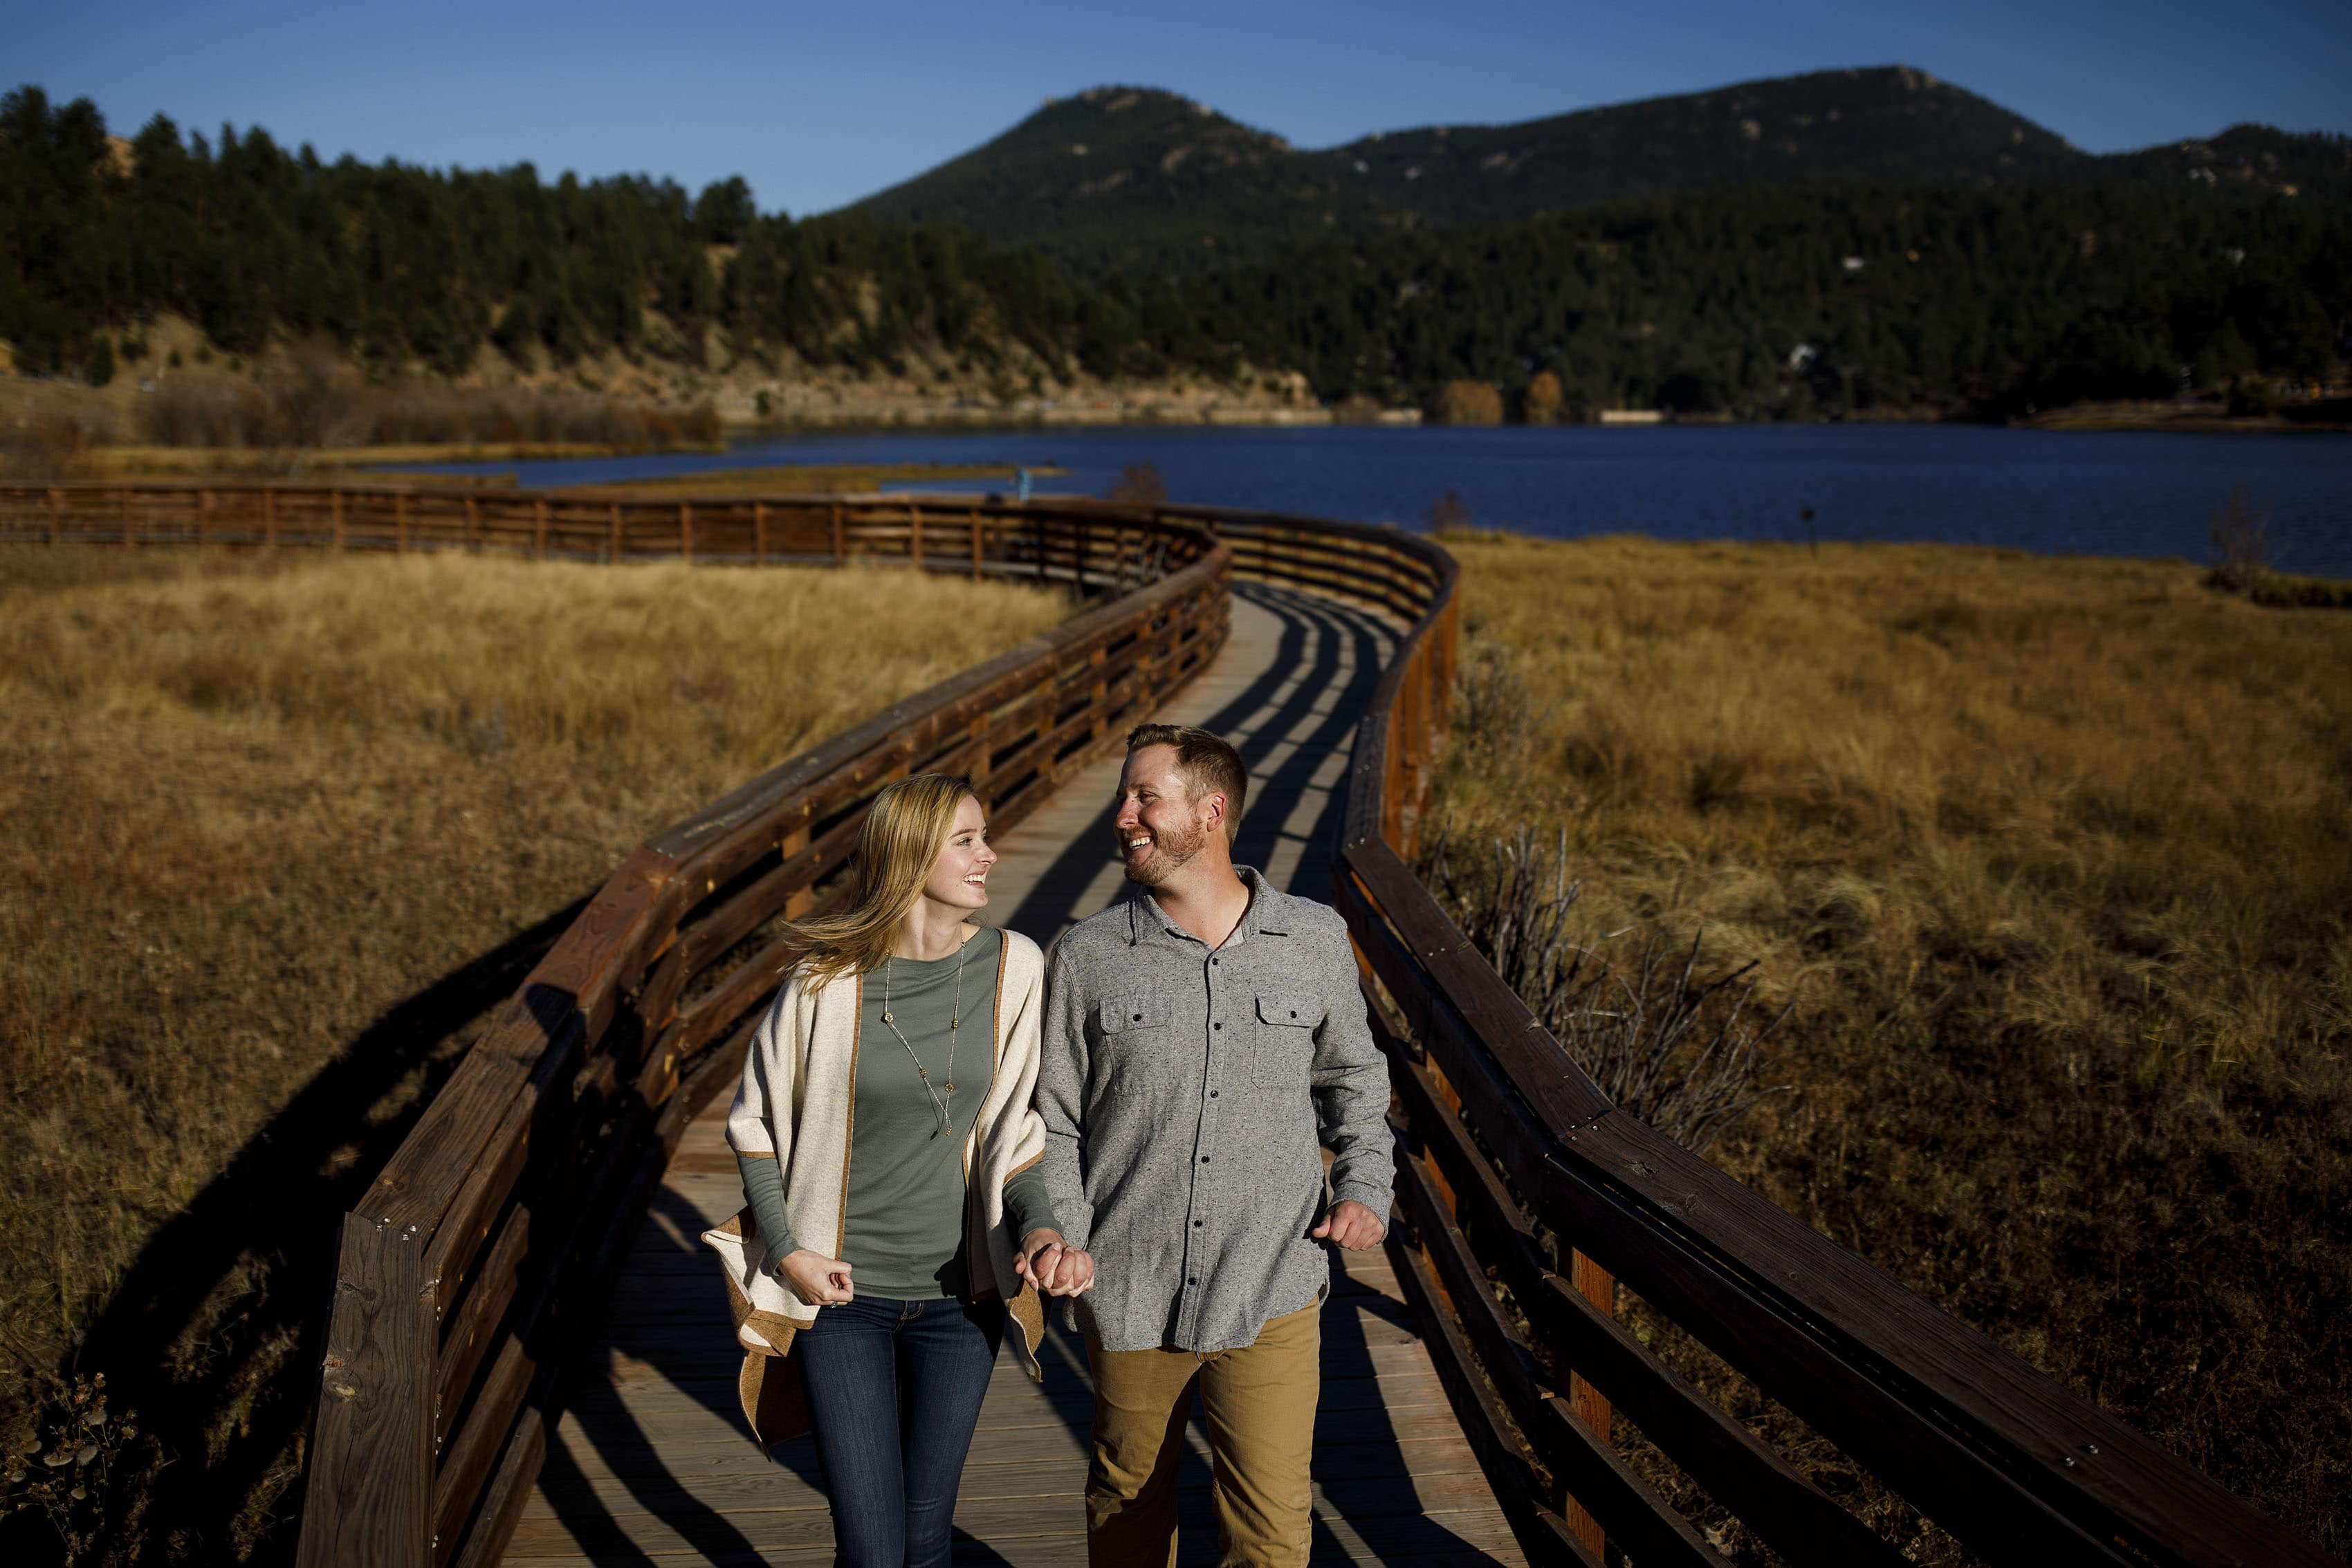 Jennifer and Stefan laugh together on the wooden path at Evergreen Lake during a fall day